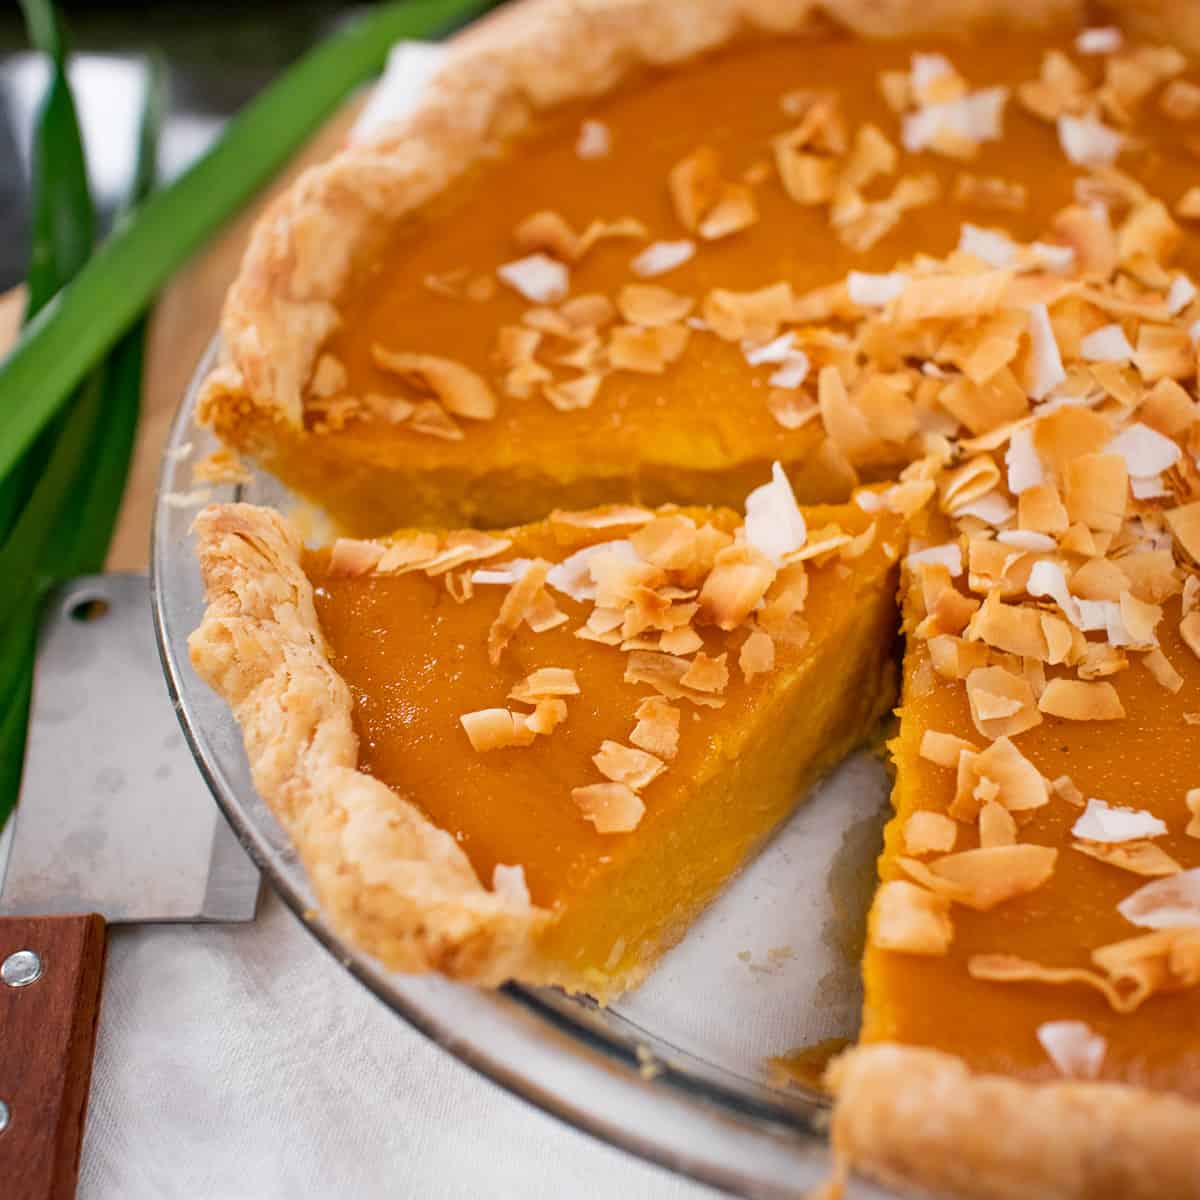 A pumpkin pie with toasted coconut on top